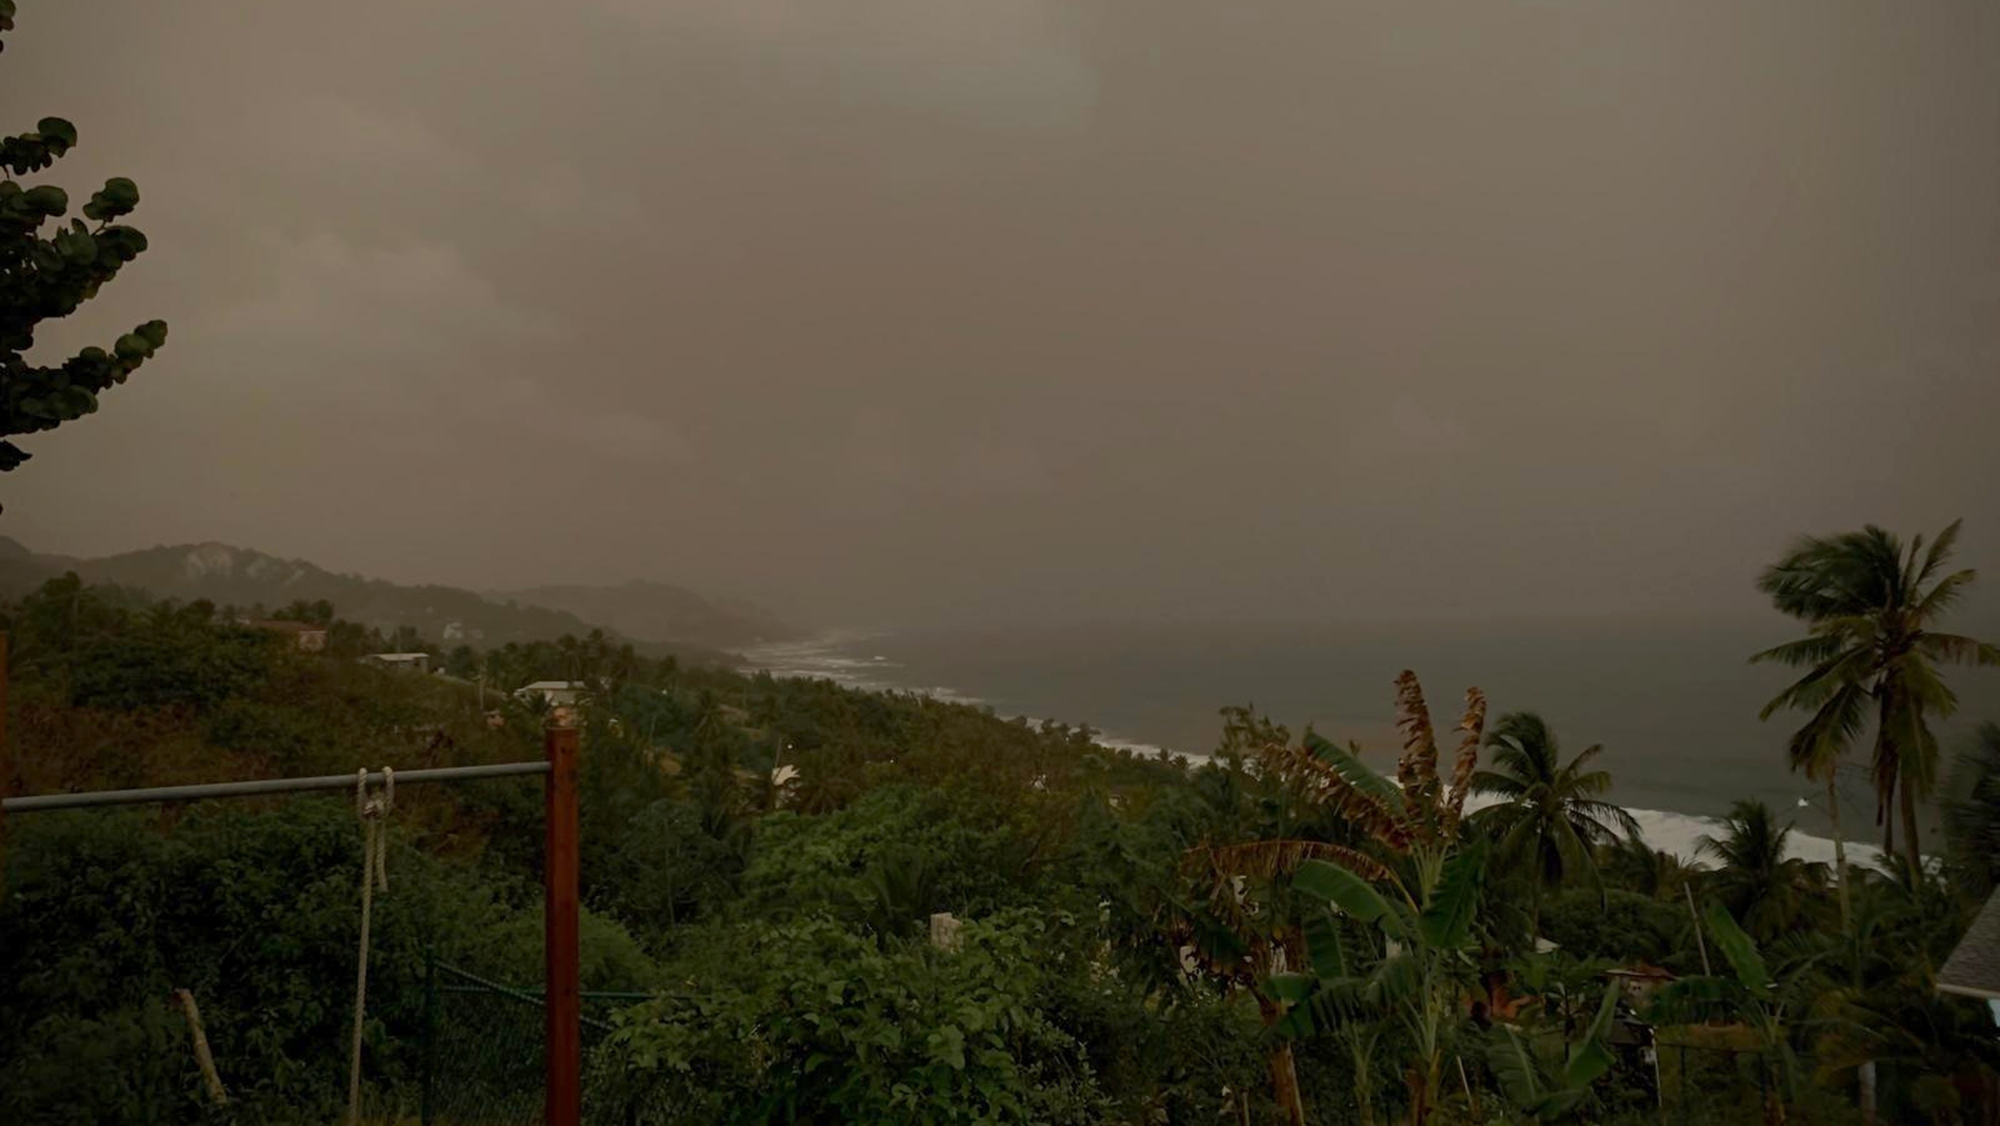 An elevated view of a coast, with palm trees and other foliage and an ocean in the background, smothered by a dust-filled, hazy atmosphere.